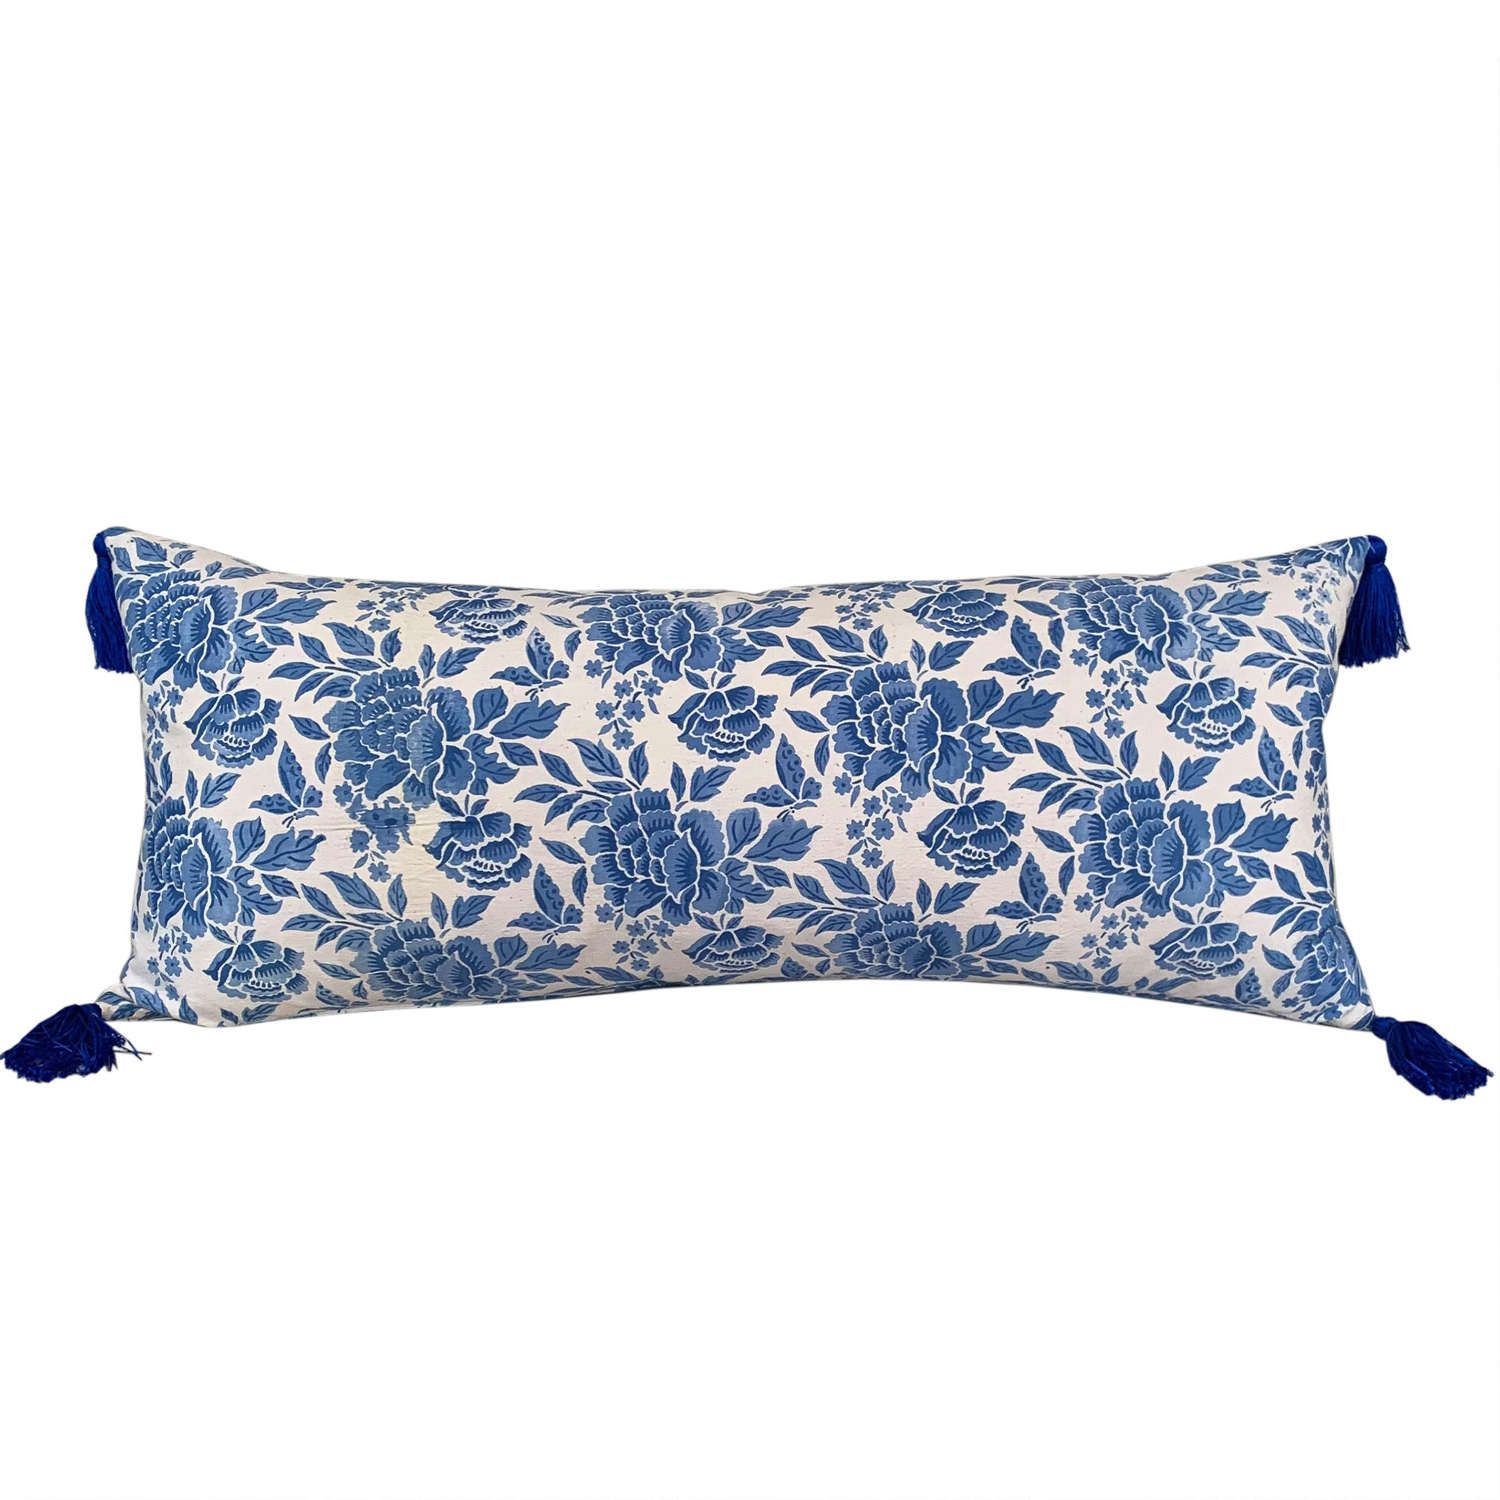 Long Blue And White Floral Cushion With Tassels